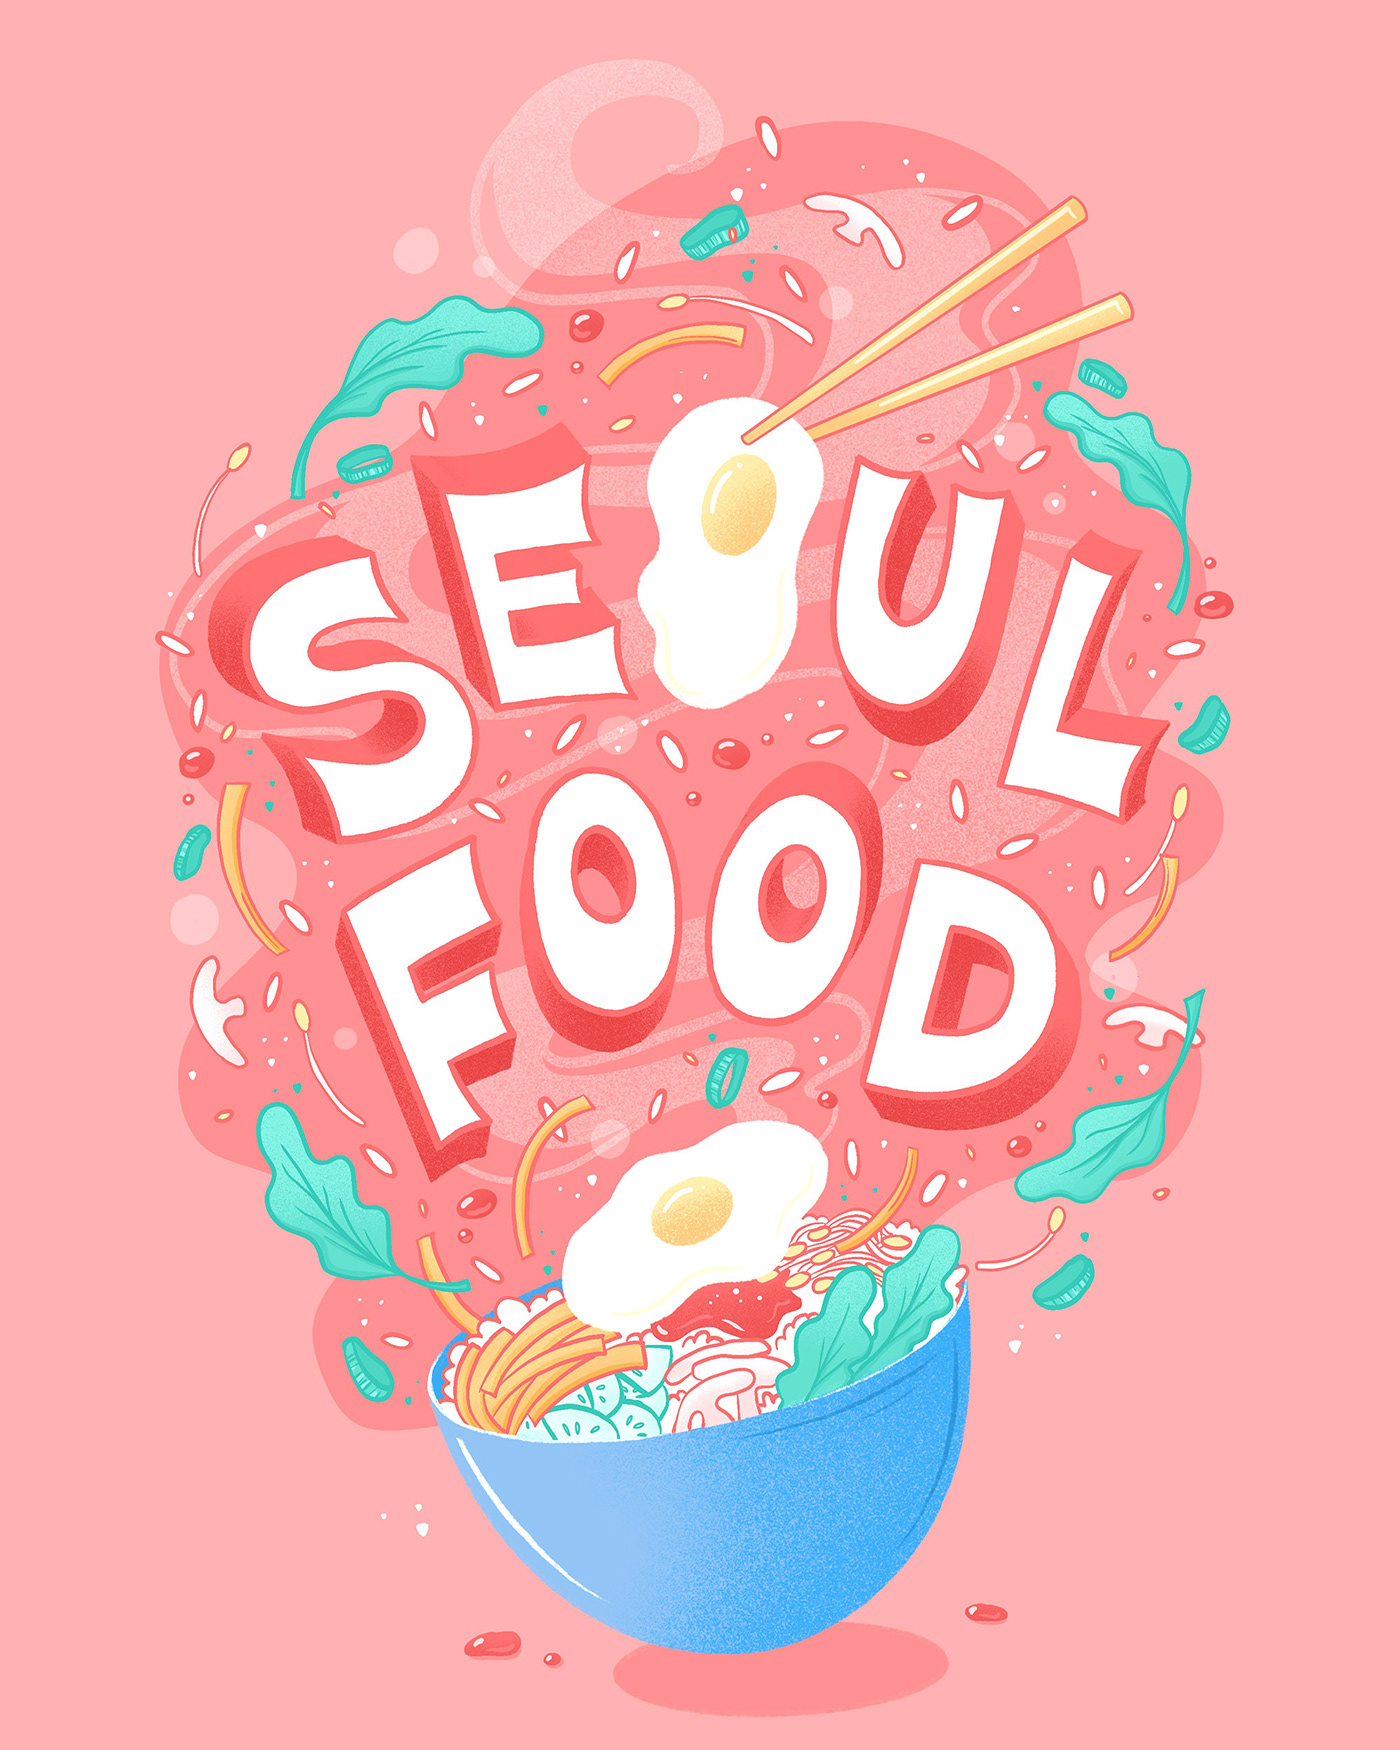 Full page lettering and illustration for Atlanta Magazine. Features “Seoul Food” and food bursting